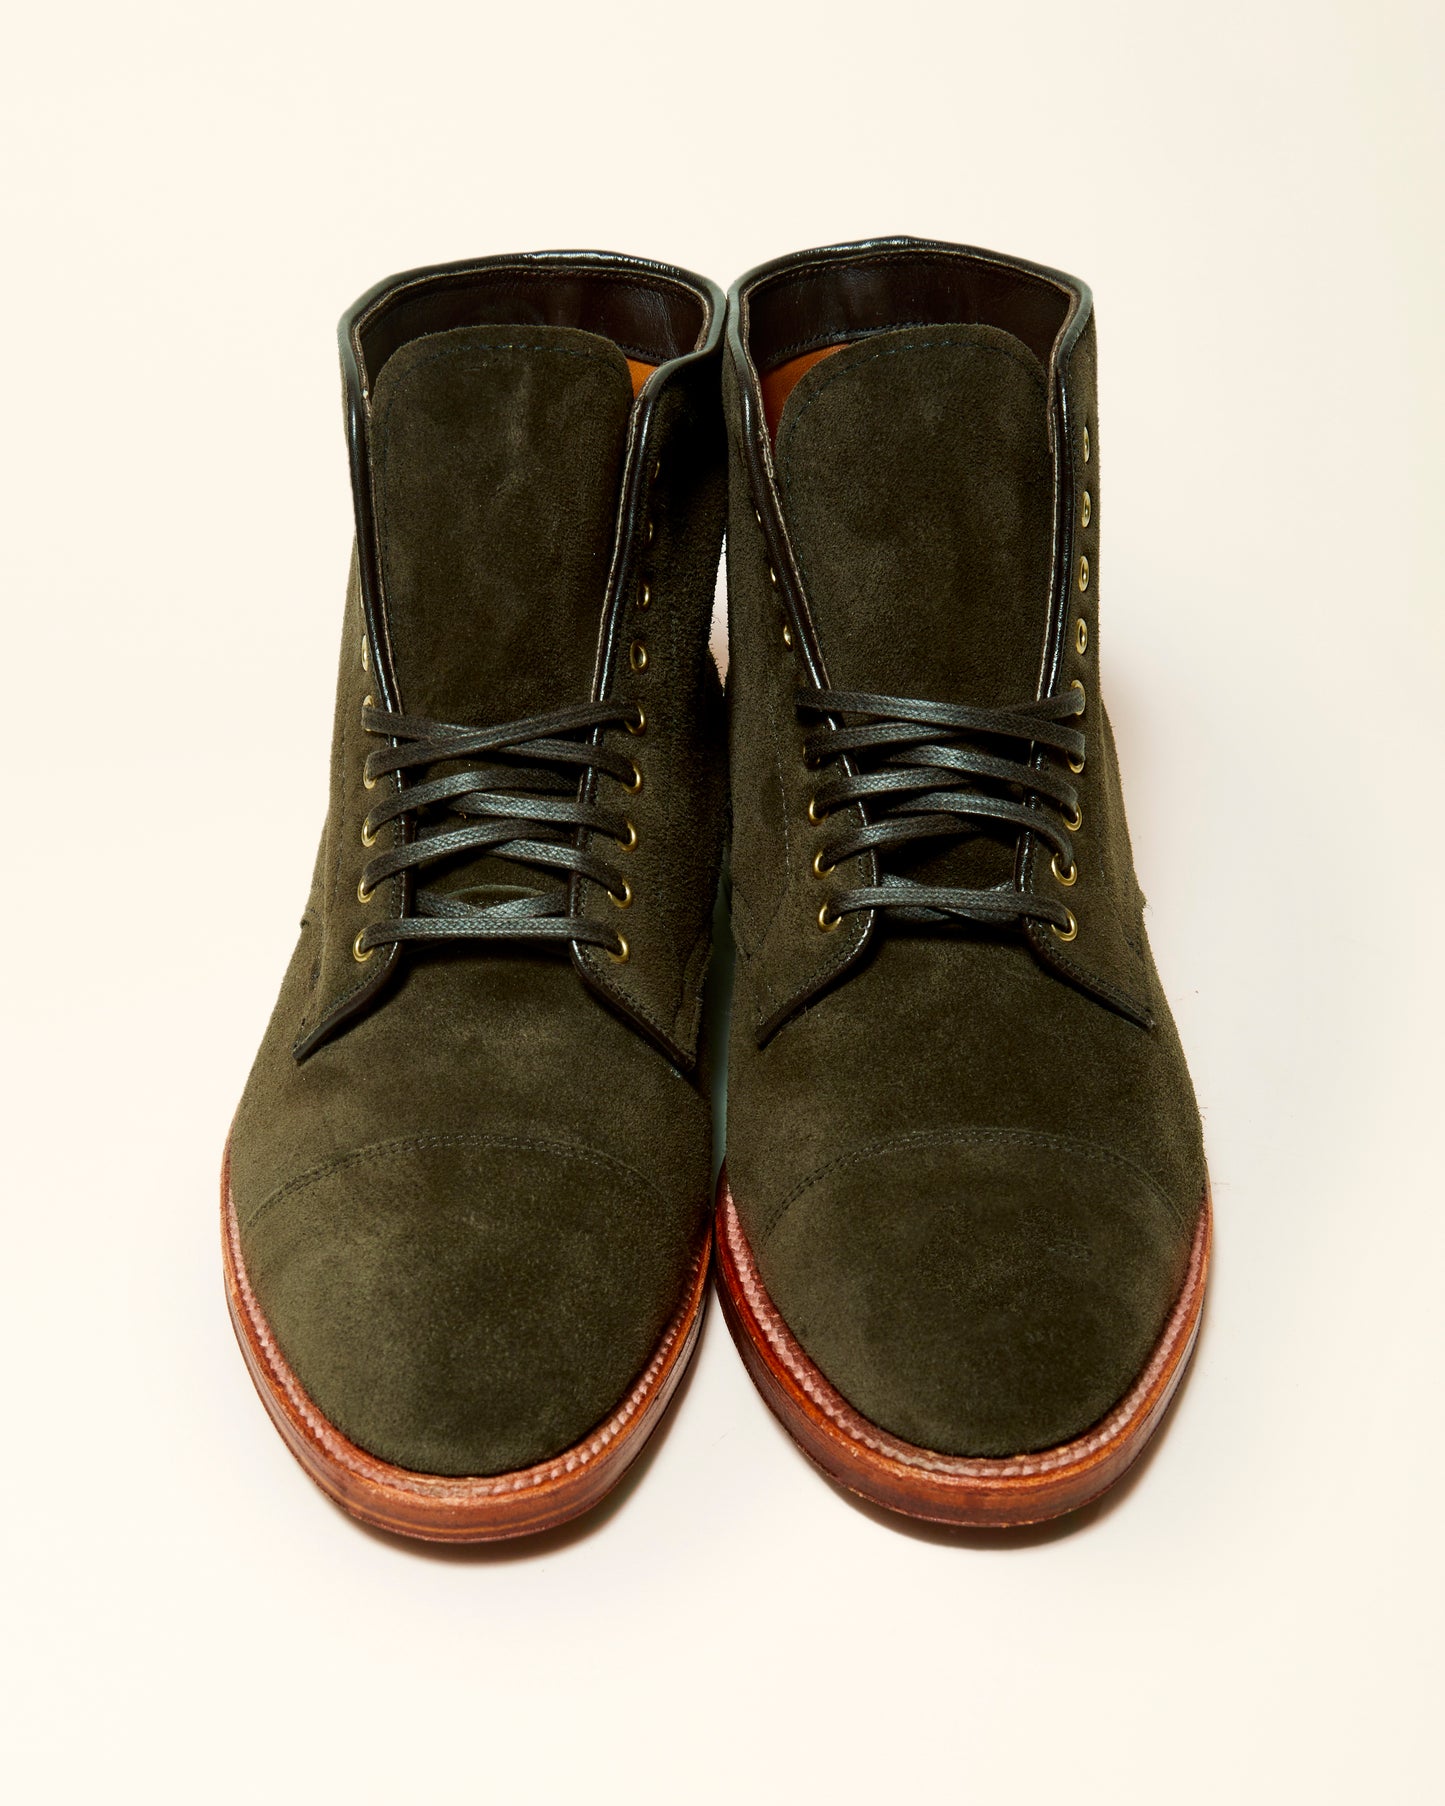 "Marvaments" Loden Green Suede Grant Last Straight Tip Boot